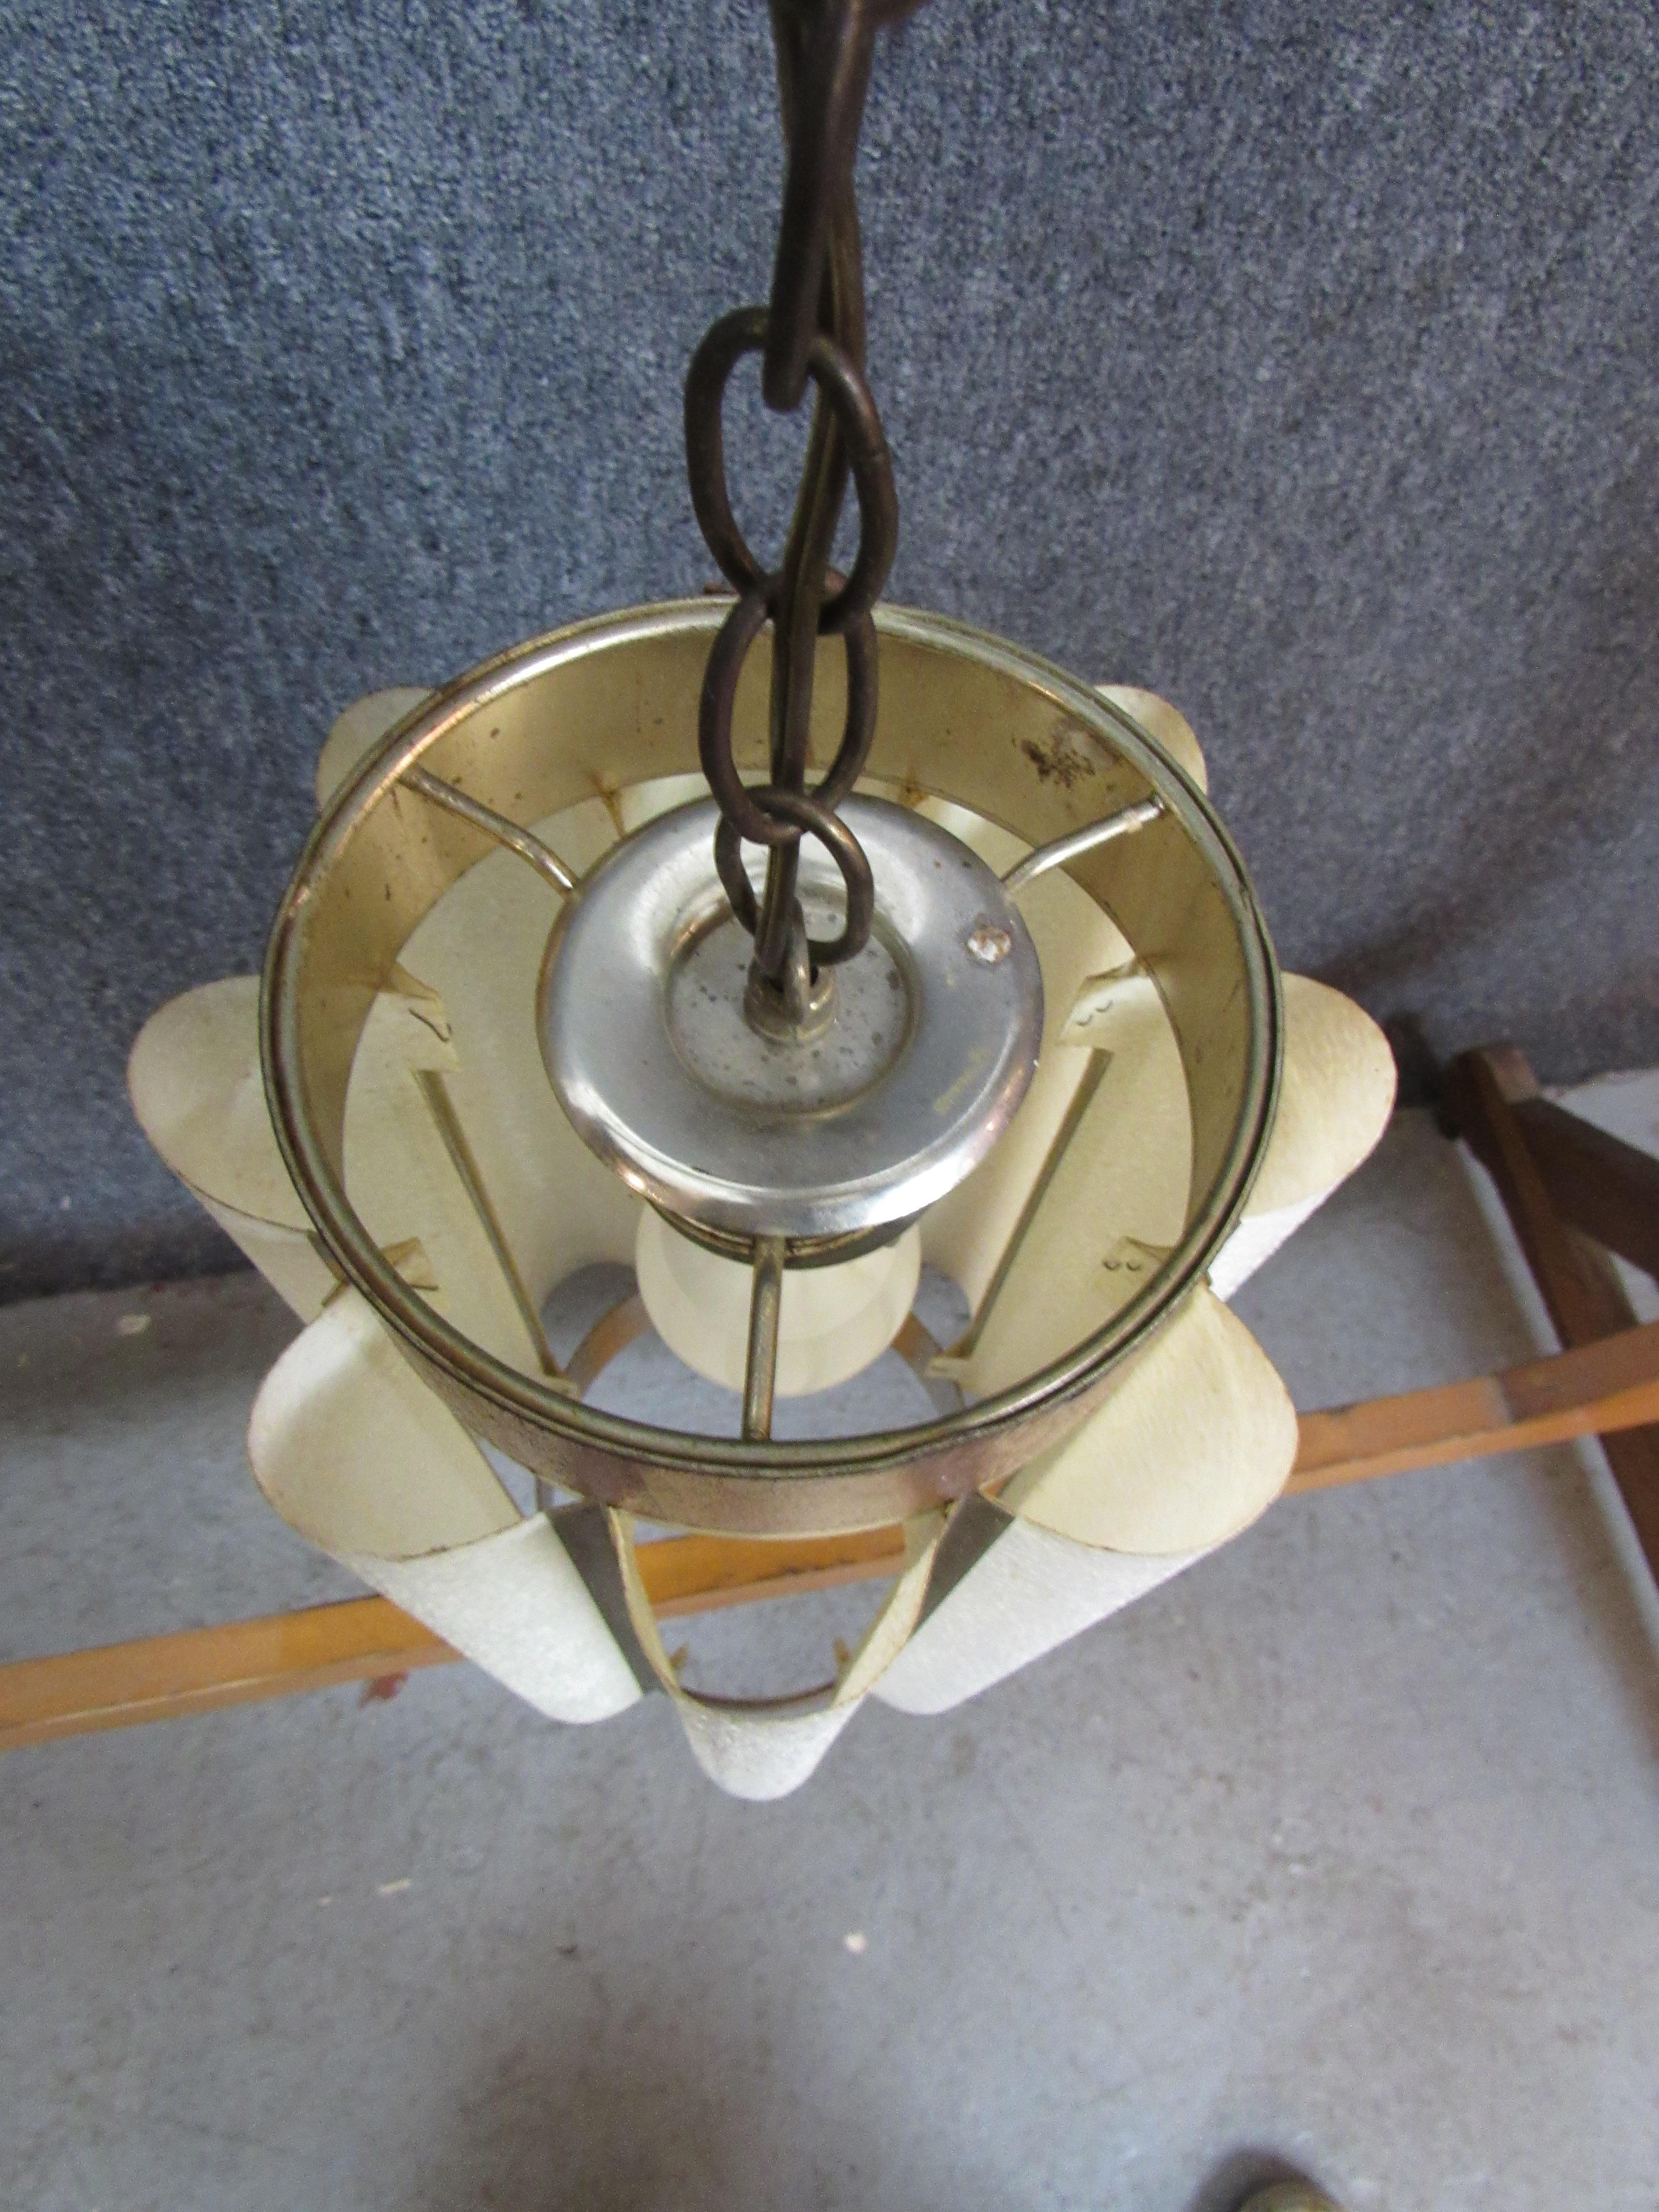 Mid-century modern hanging lamp with fluted paper shades around a wood frame. Single medium base socket under white shades give a subtle glowing light.
Please confirm location NY or NJ